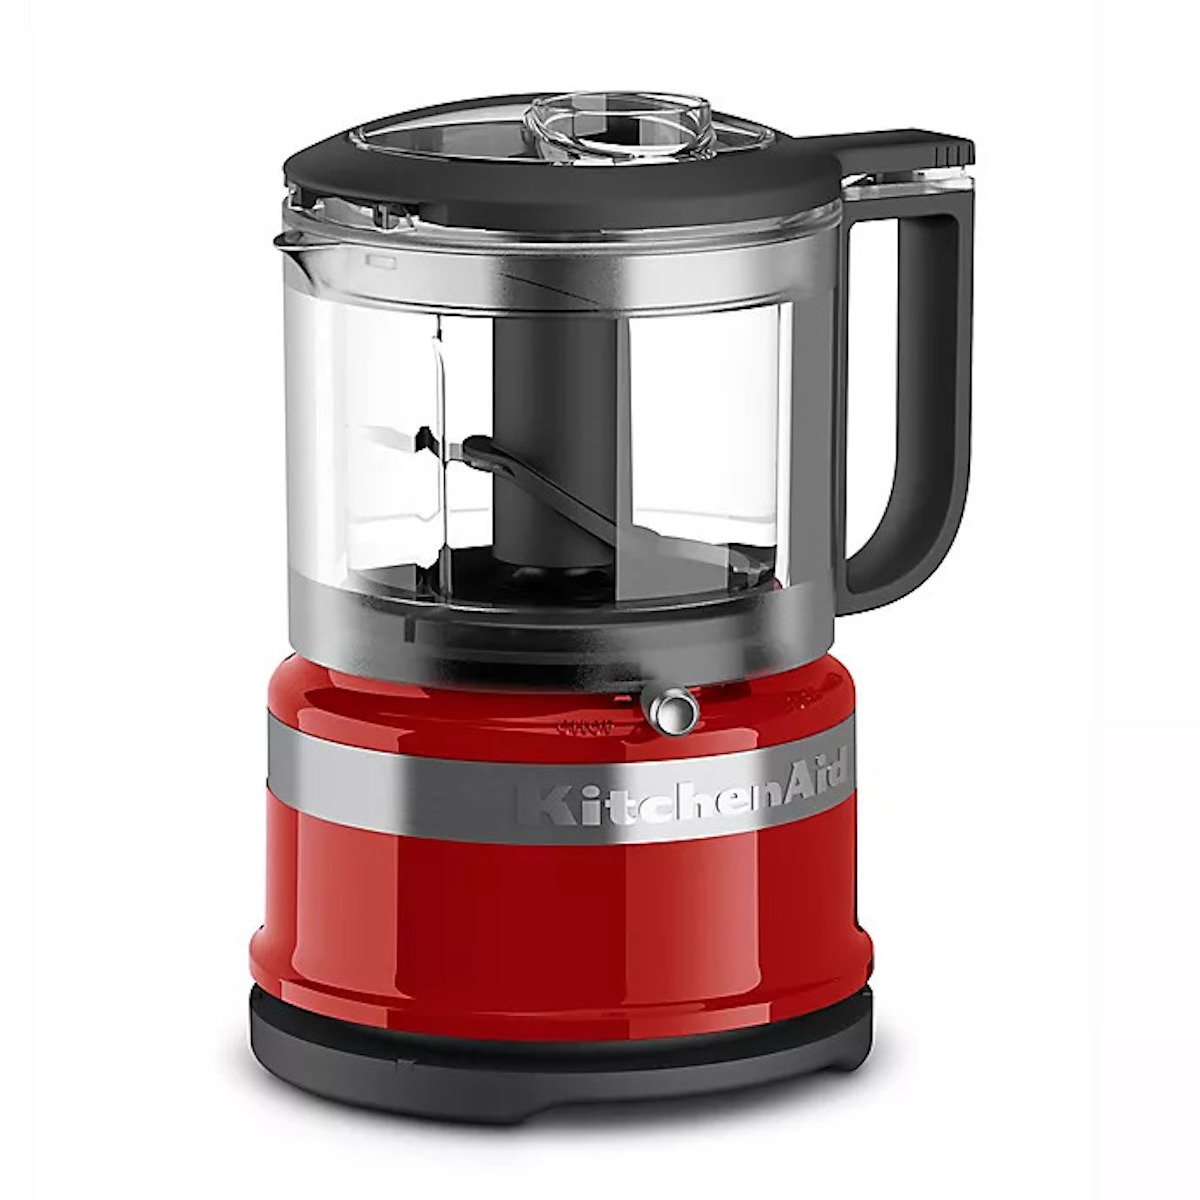 16 Small Kitchen Appliances You Never Knew Existed But Now Can't Live  Without